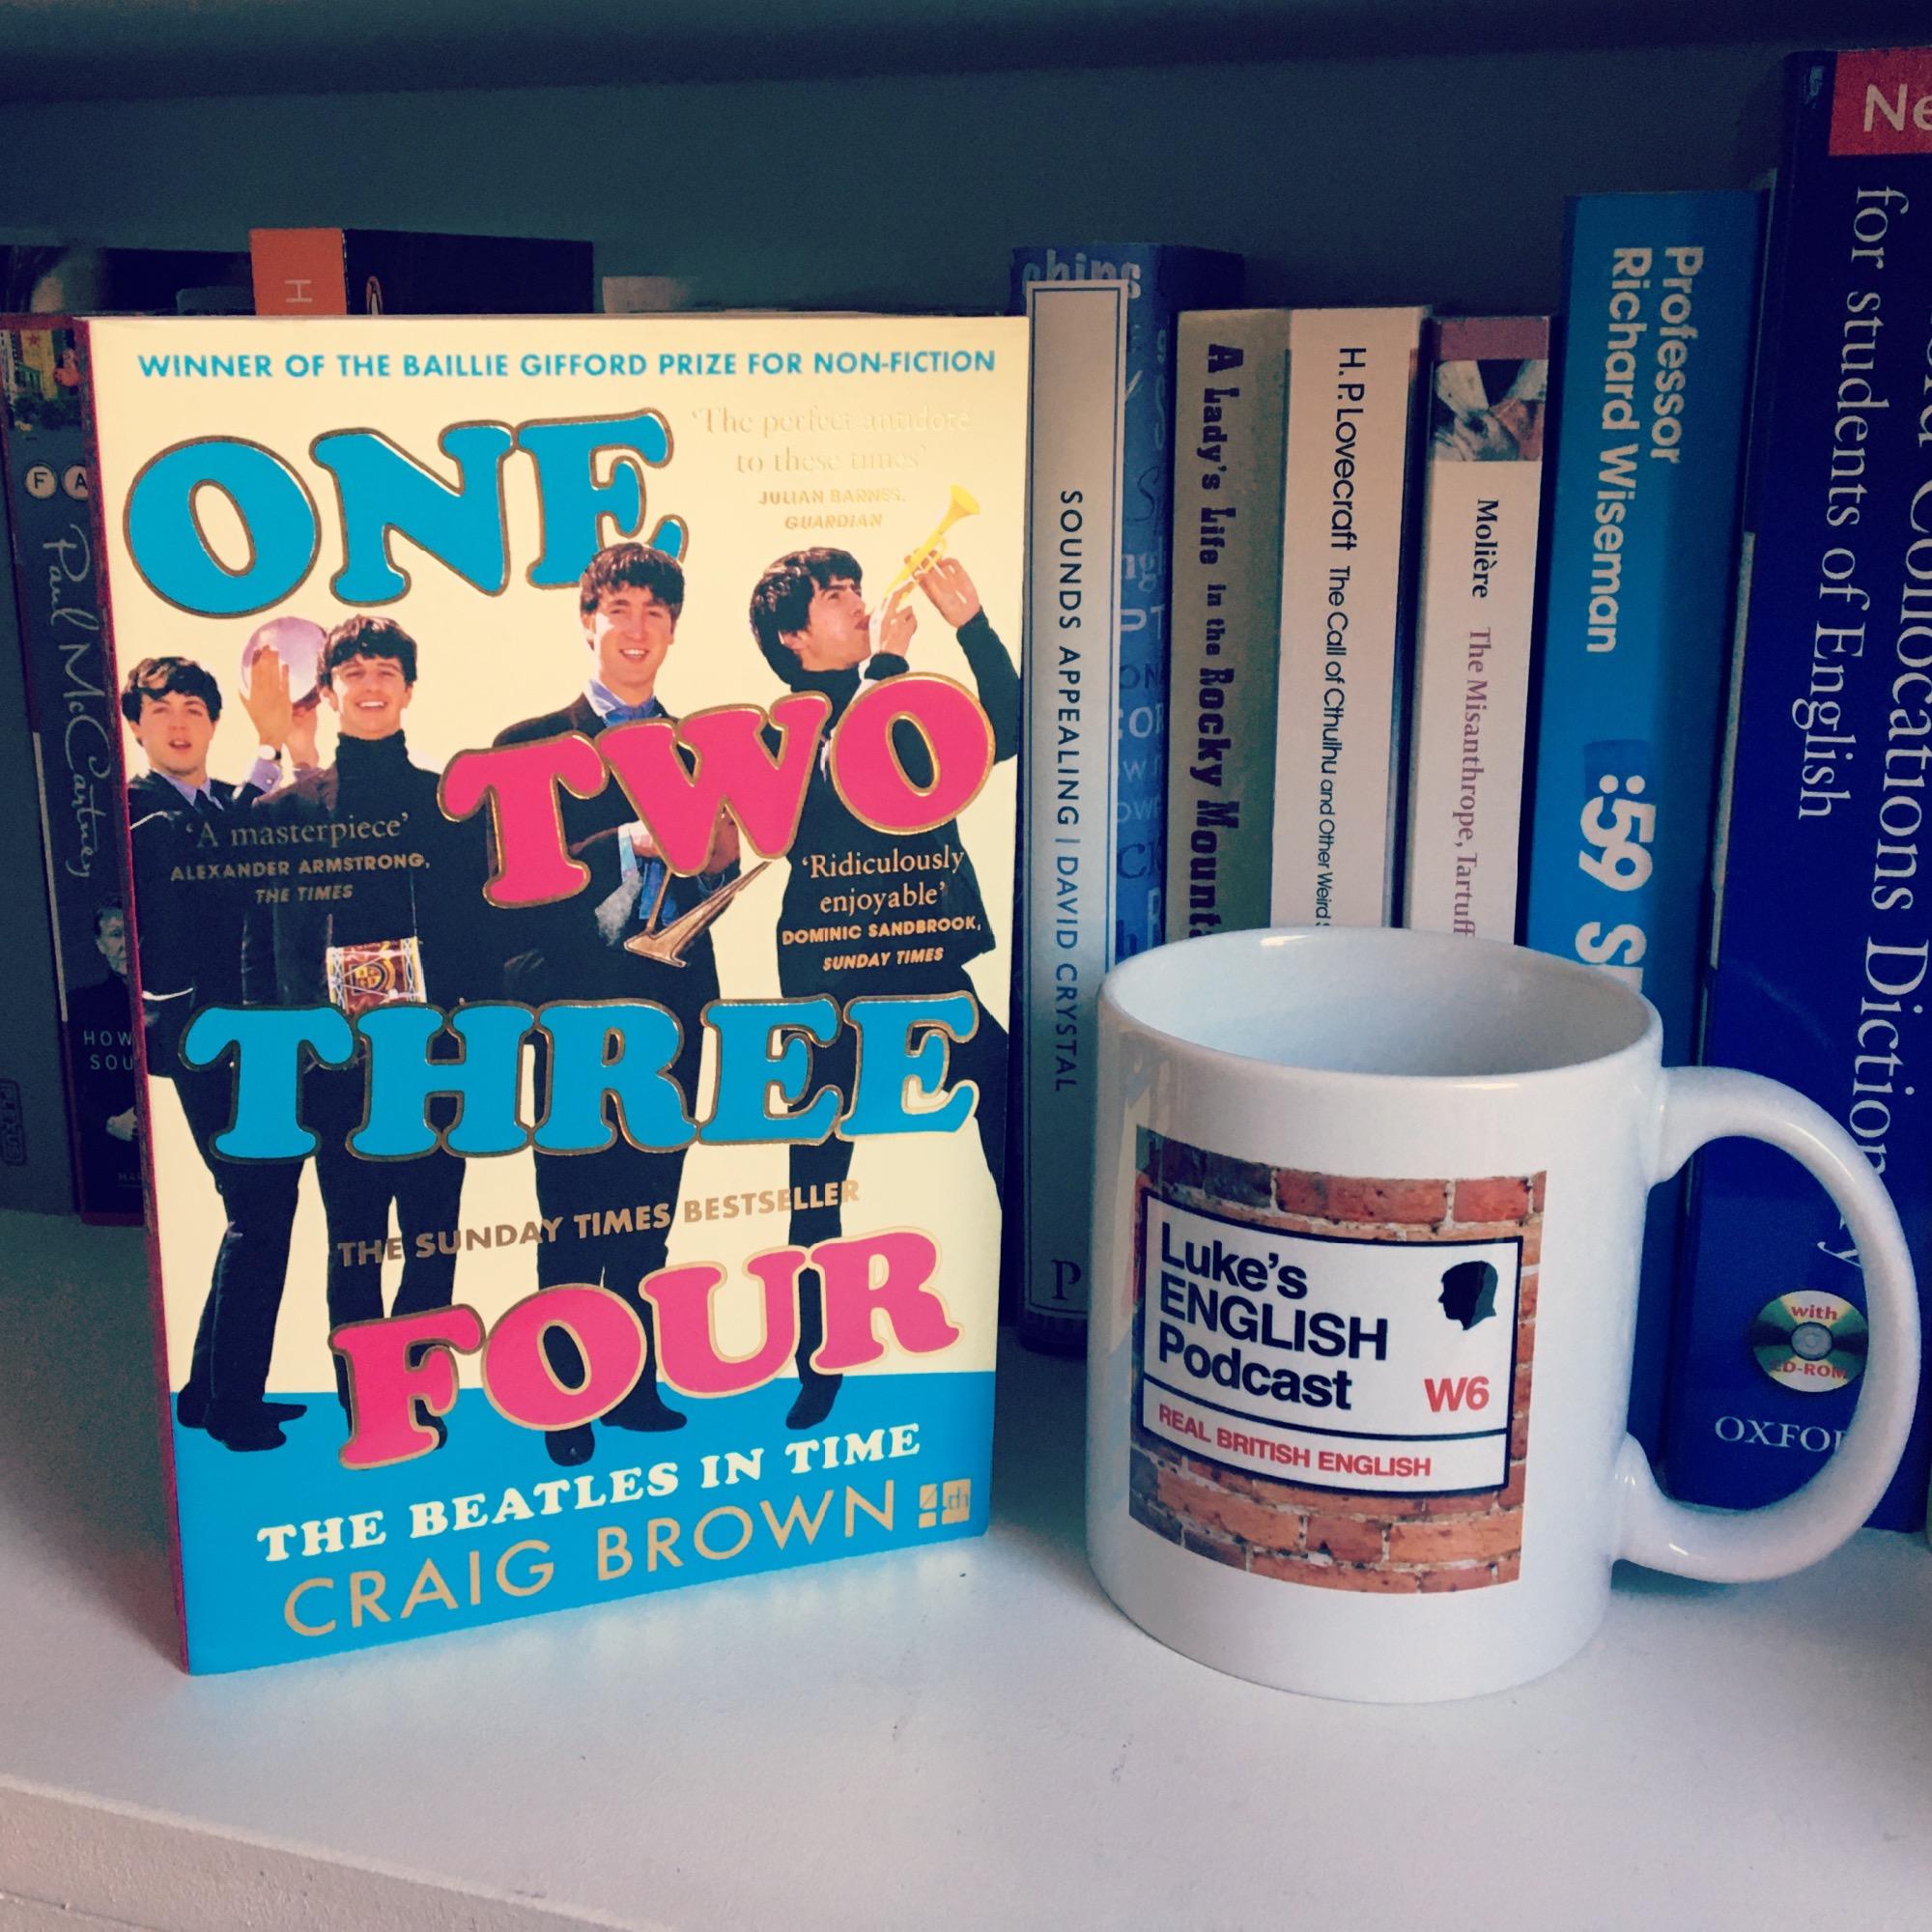 717. Gill's Book Club: "One Two Three Four - The Beatles In Time" by Craig Brown